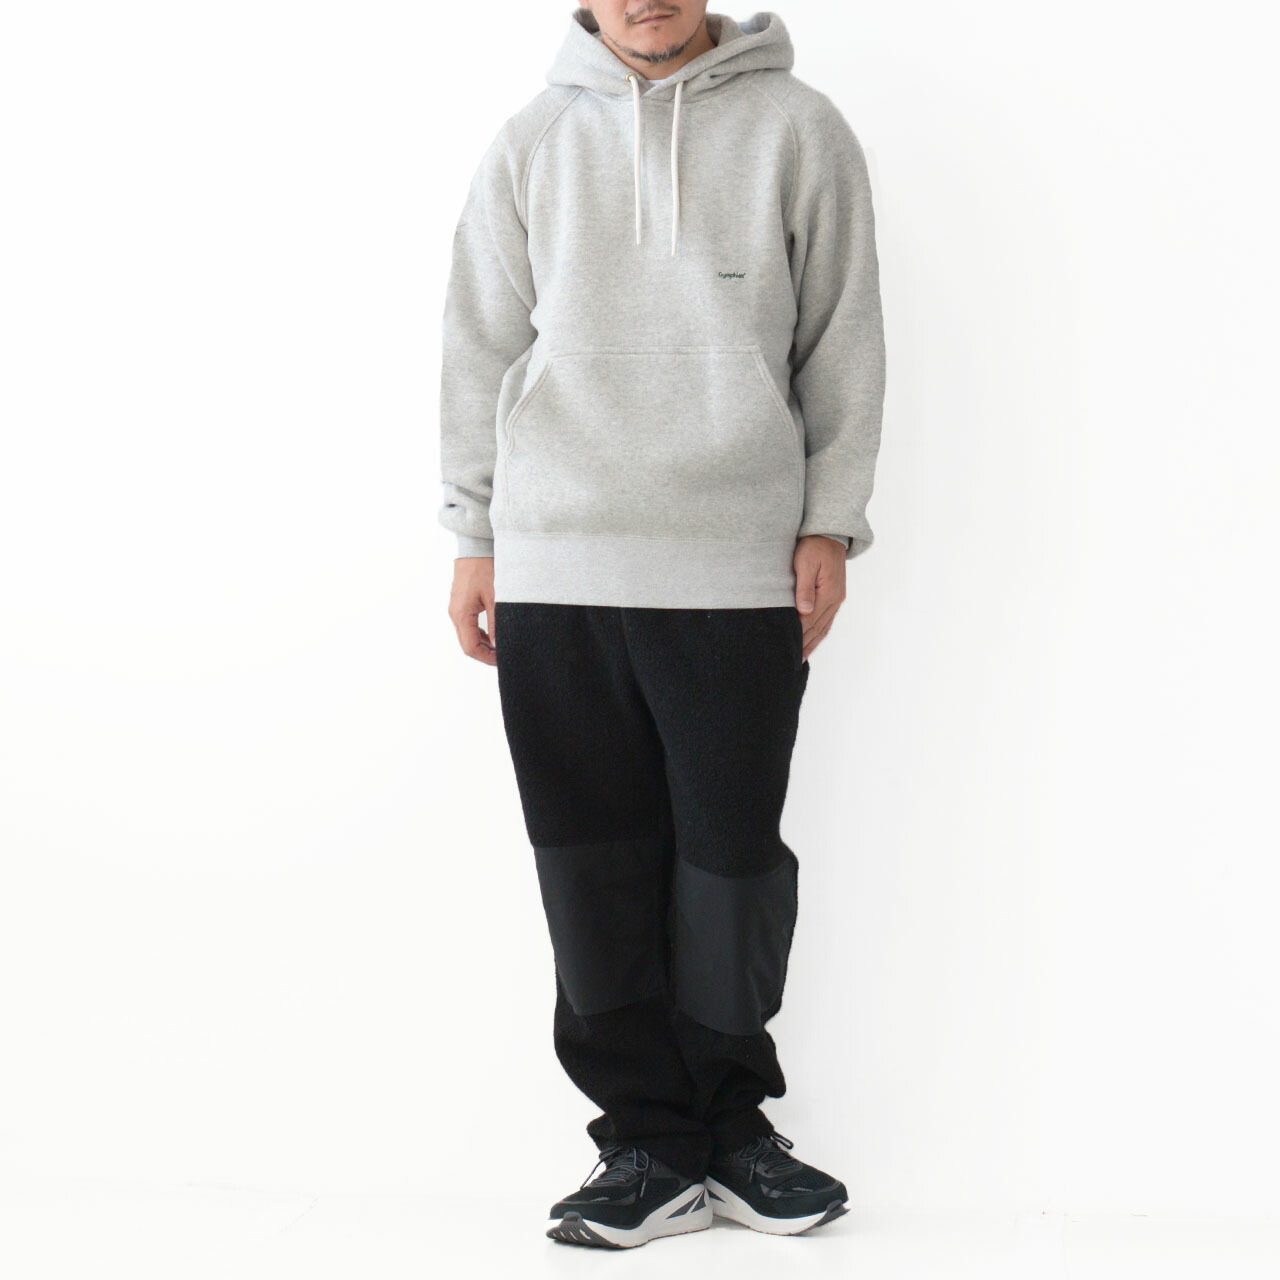 Gymphlex [ジムフレックス] SWING SLEEVE PULLOVER HOODIE [GY-C0014 ARB]_f0051306_13541425.jpg